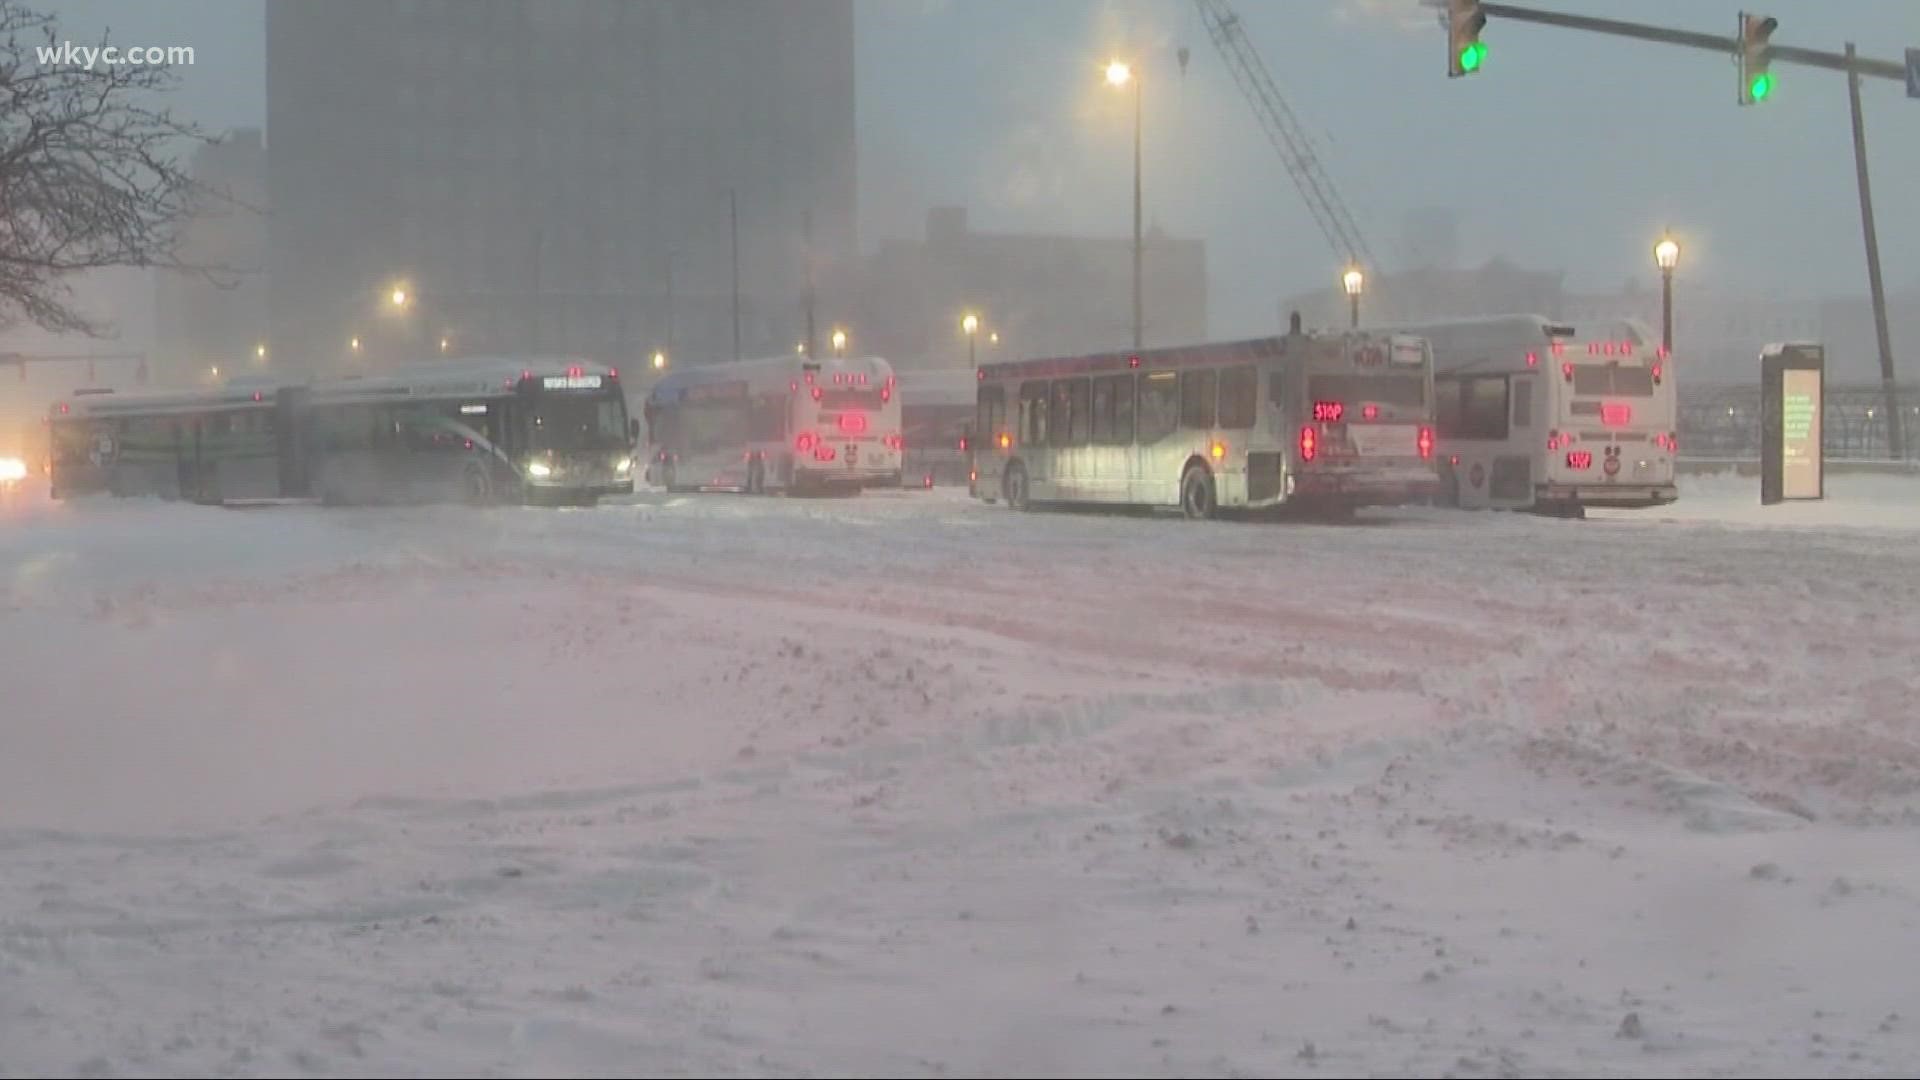 The Greater Cleveland Regional Transit Authority has issued a statement on their decision to suspend service during the winter storm on January 17, 2022.